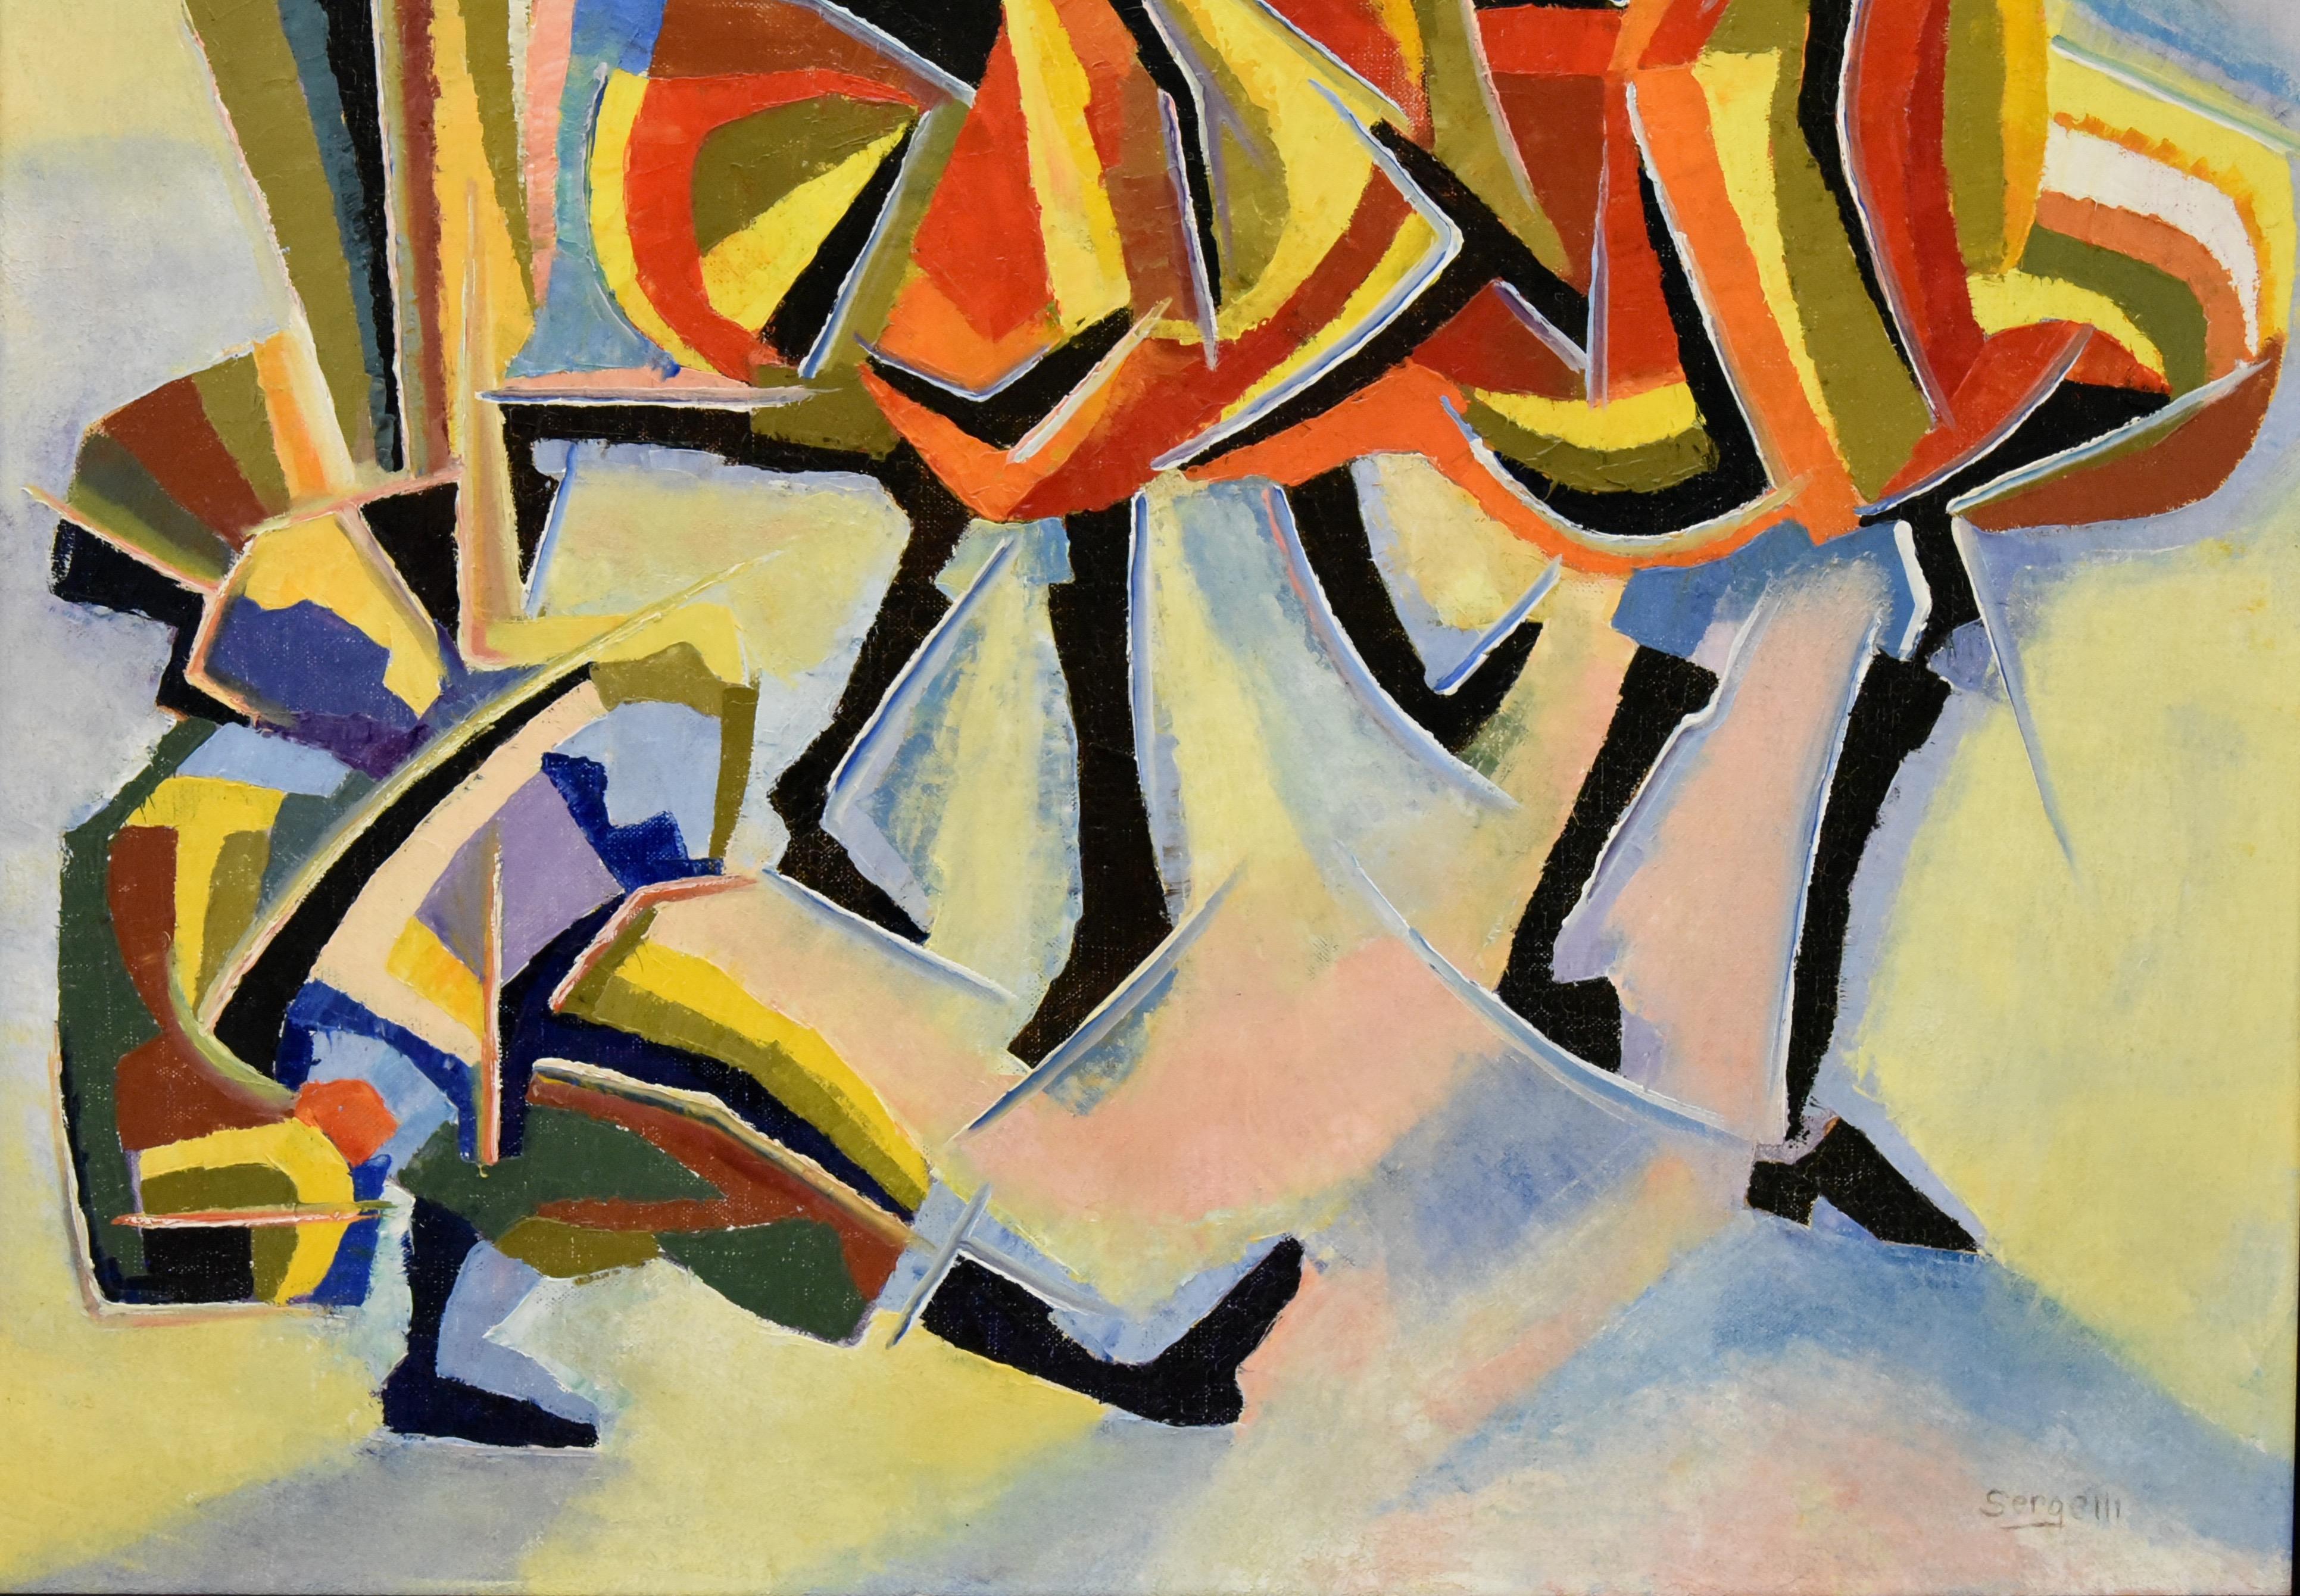 Mid-Century Modern Cubist Oil Painting of Dancers and Musicians Serge Magnin, 1960, France